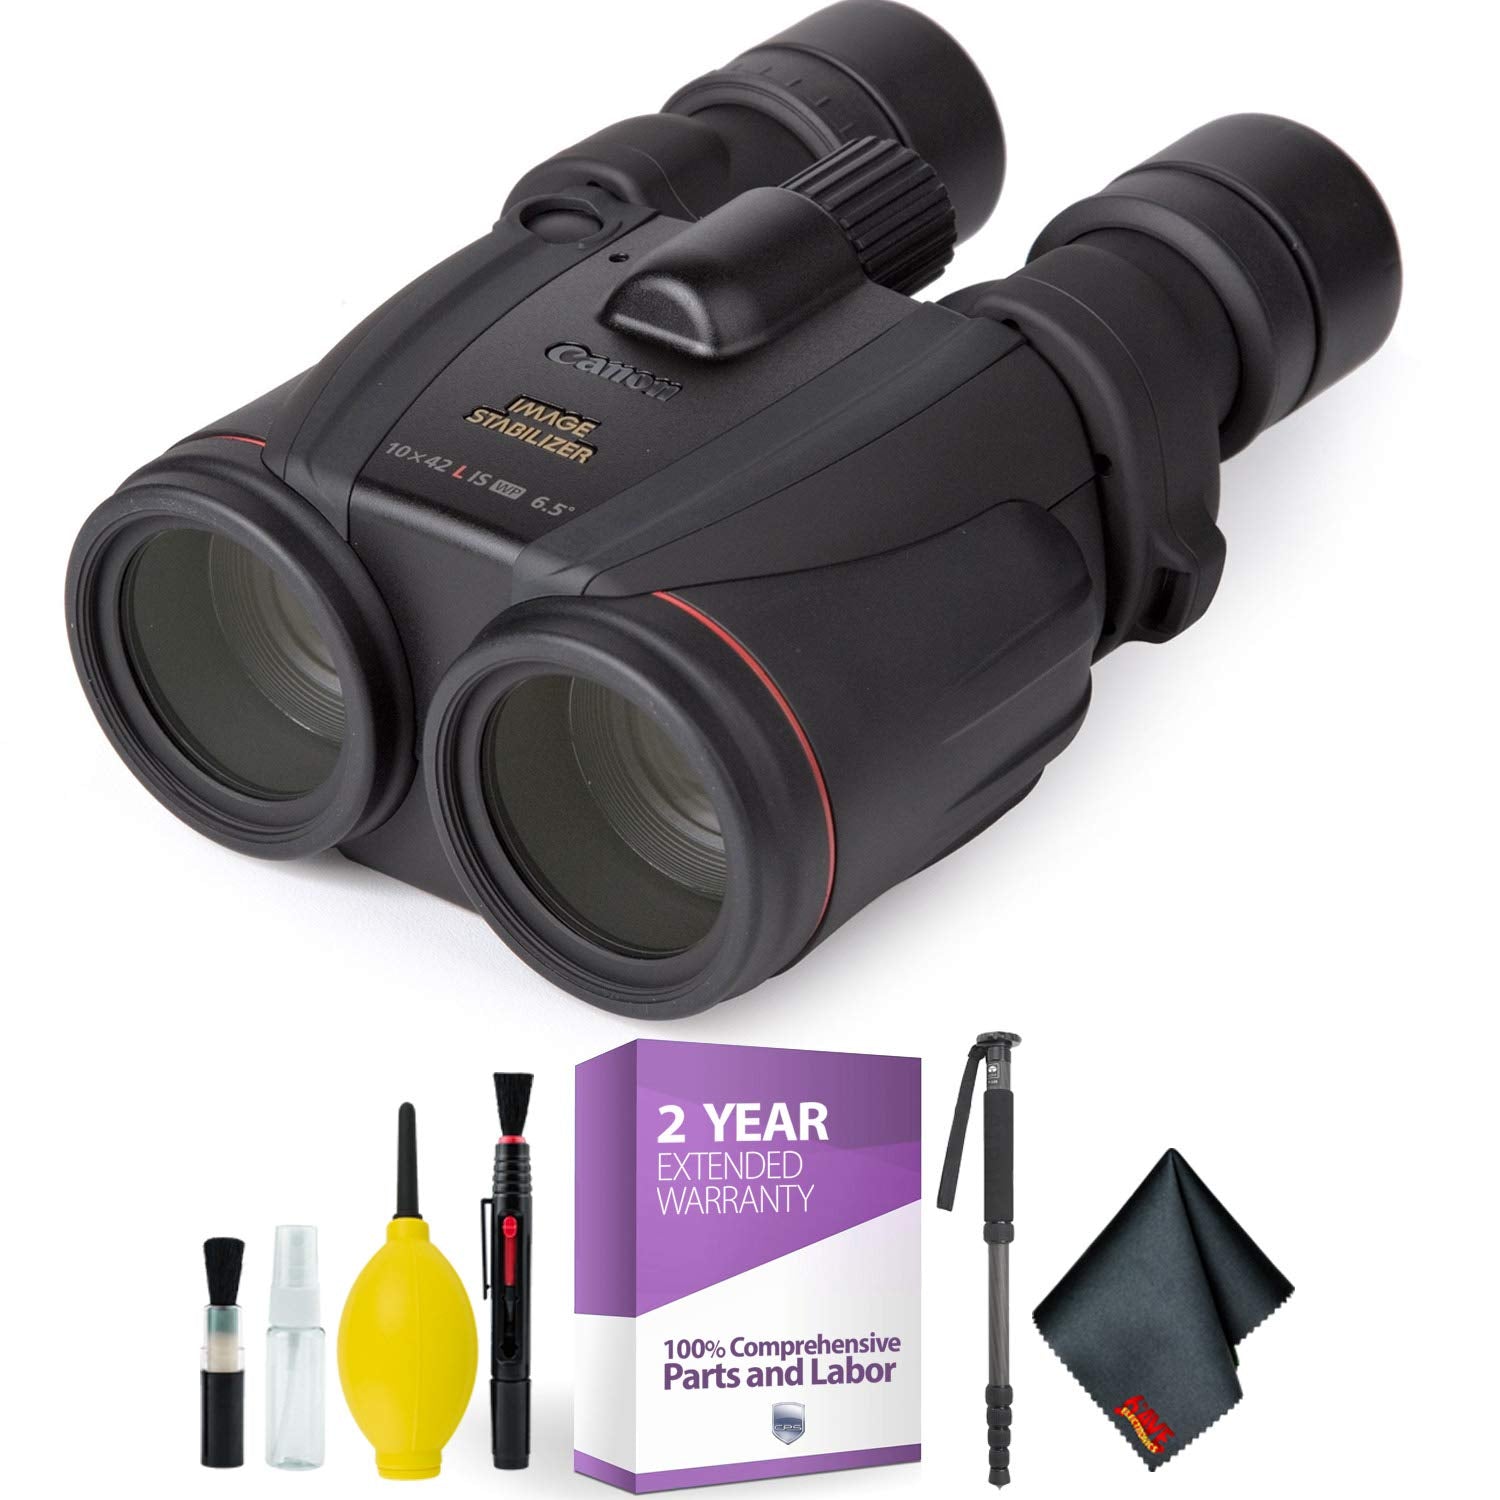 Canon 10x42 L is WP Image Stabilized Binocular + Cleaning Kit + 2 Year Extended Warranty